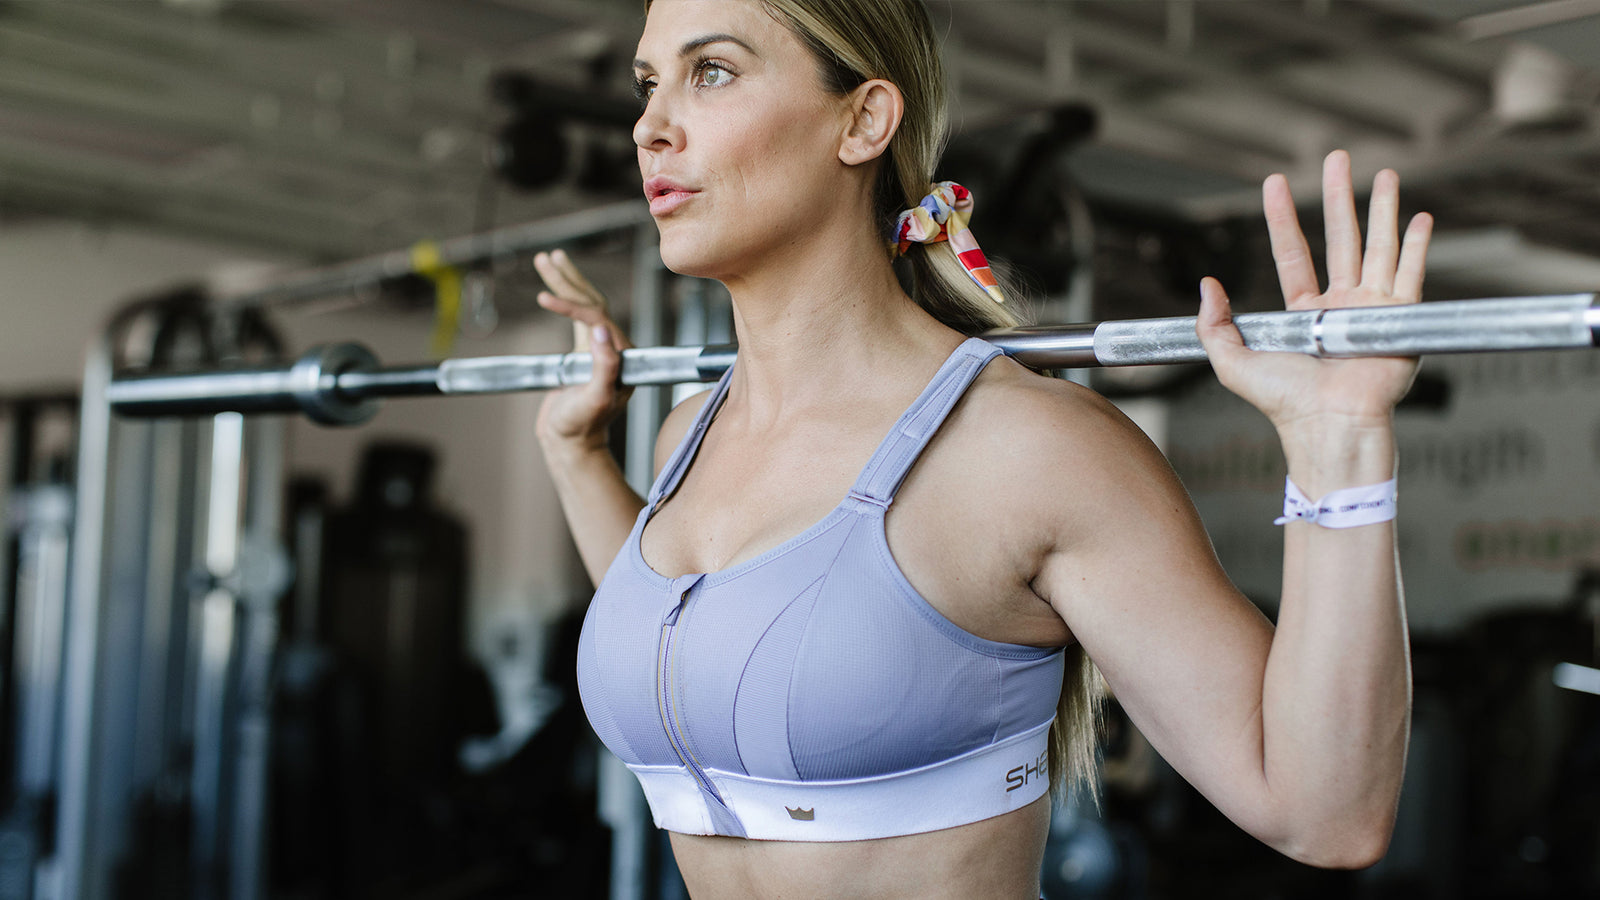 A Revolutionary Sports Bra Incorporates Tech To Provide Women With